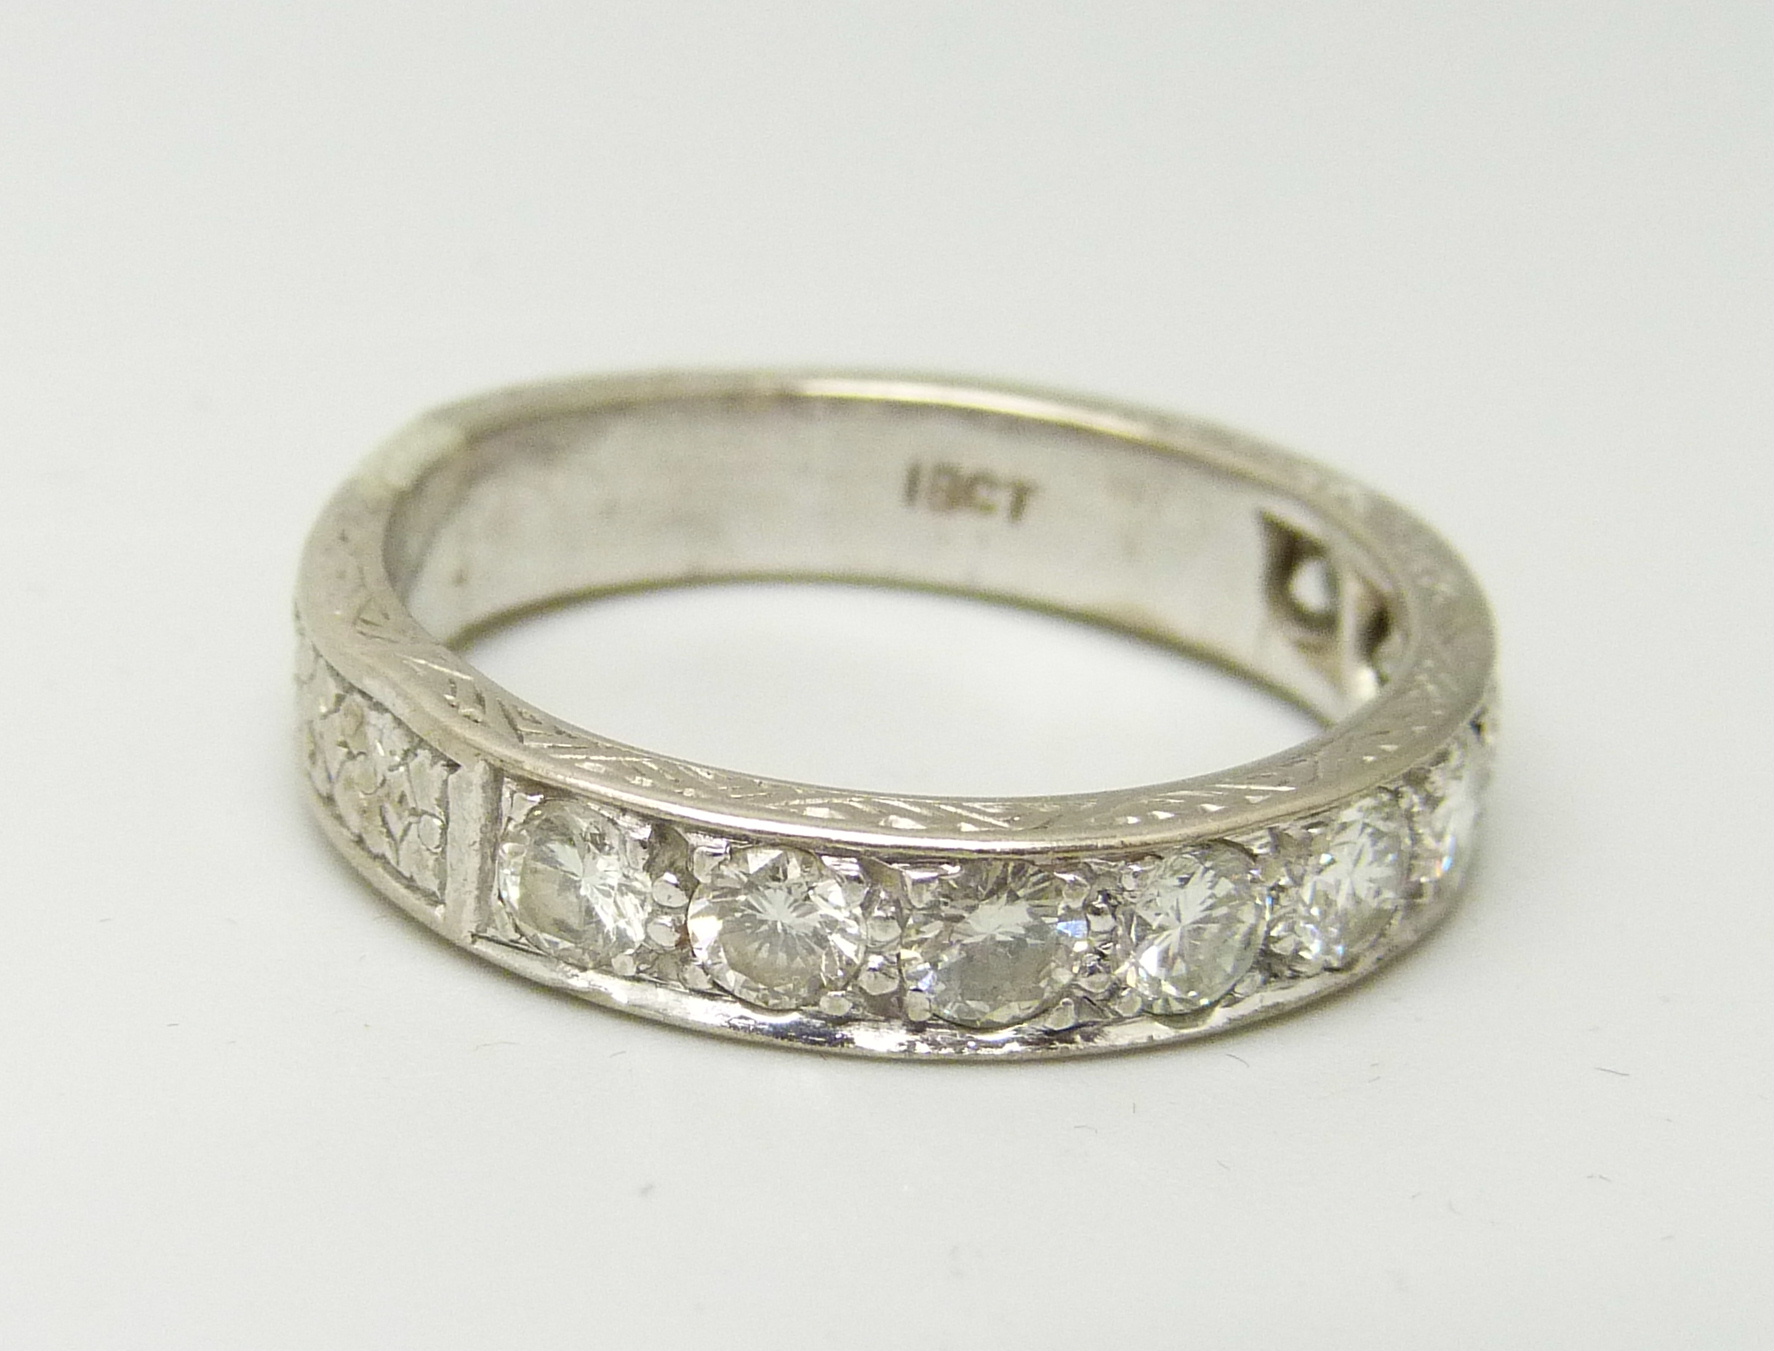 An 18ct gold and diamond half-eternity ring, approximately 1.40ct diamond weight, 7.2g, T